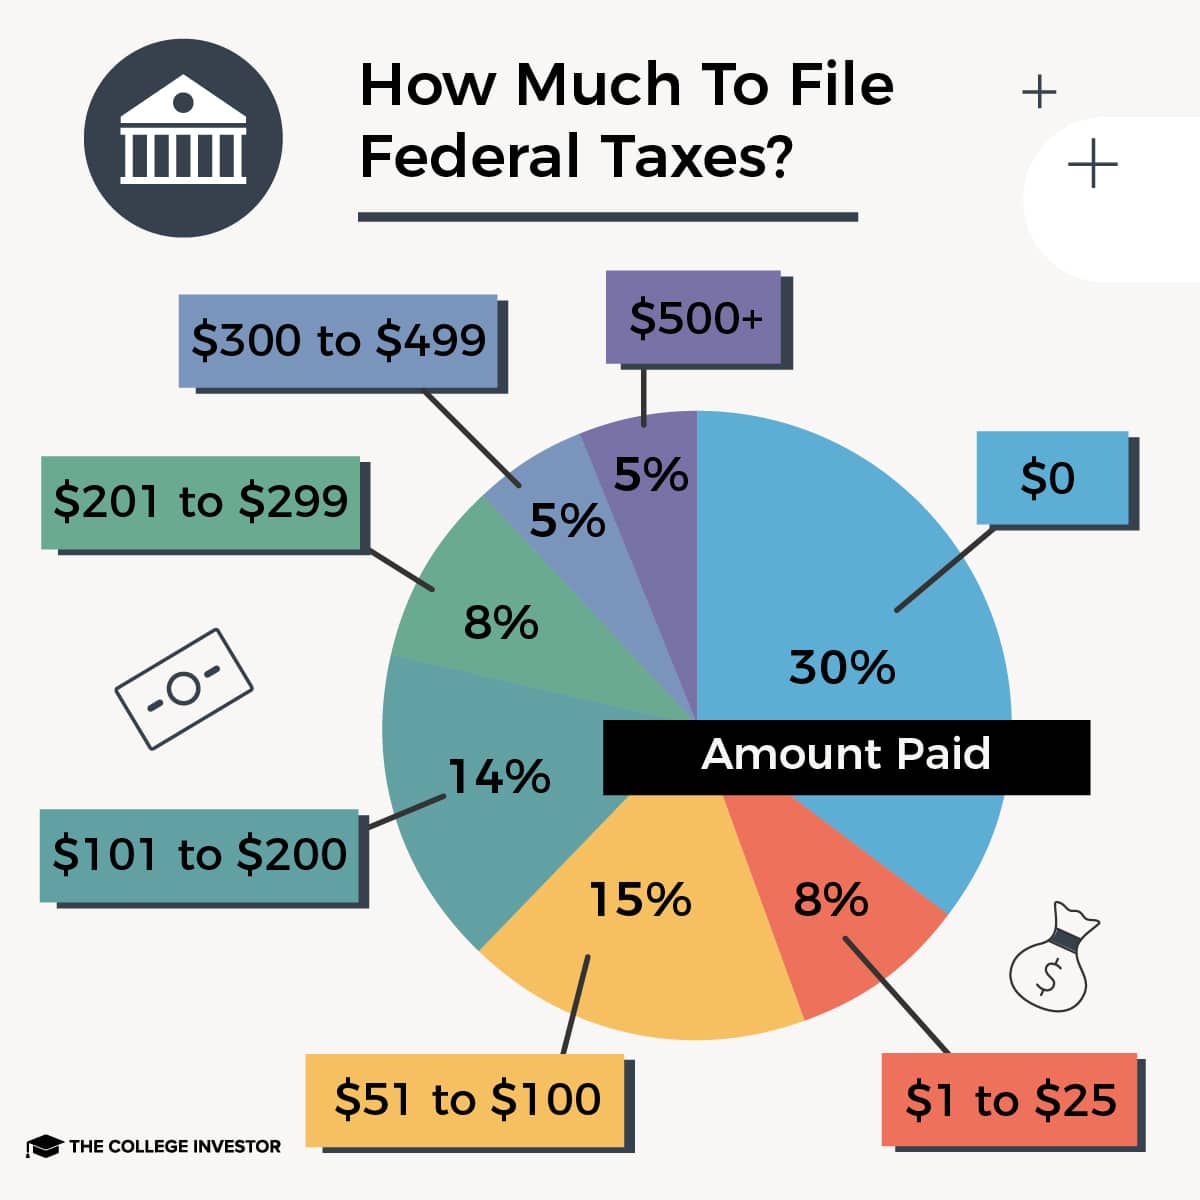 How much does it cost to file a federal tax return